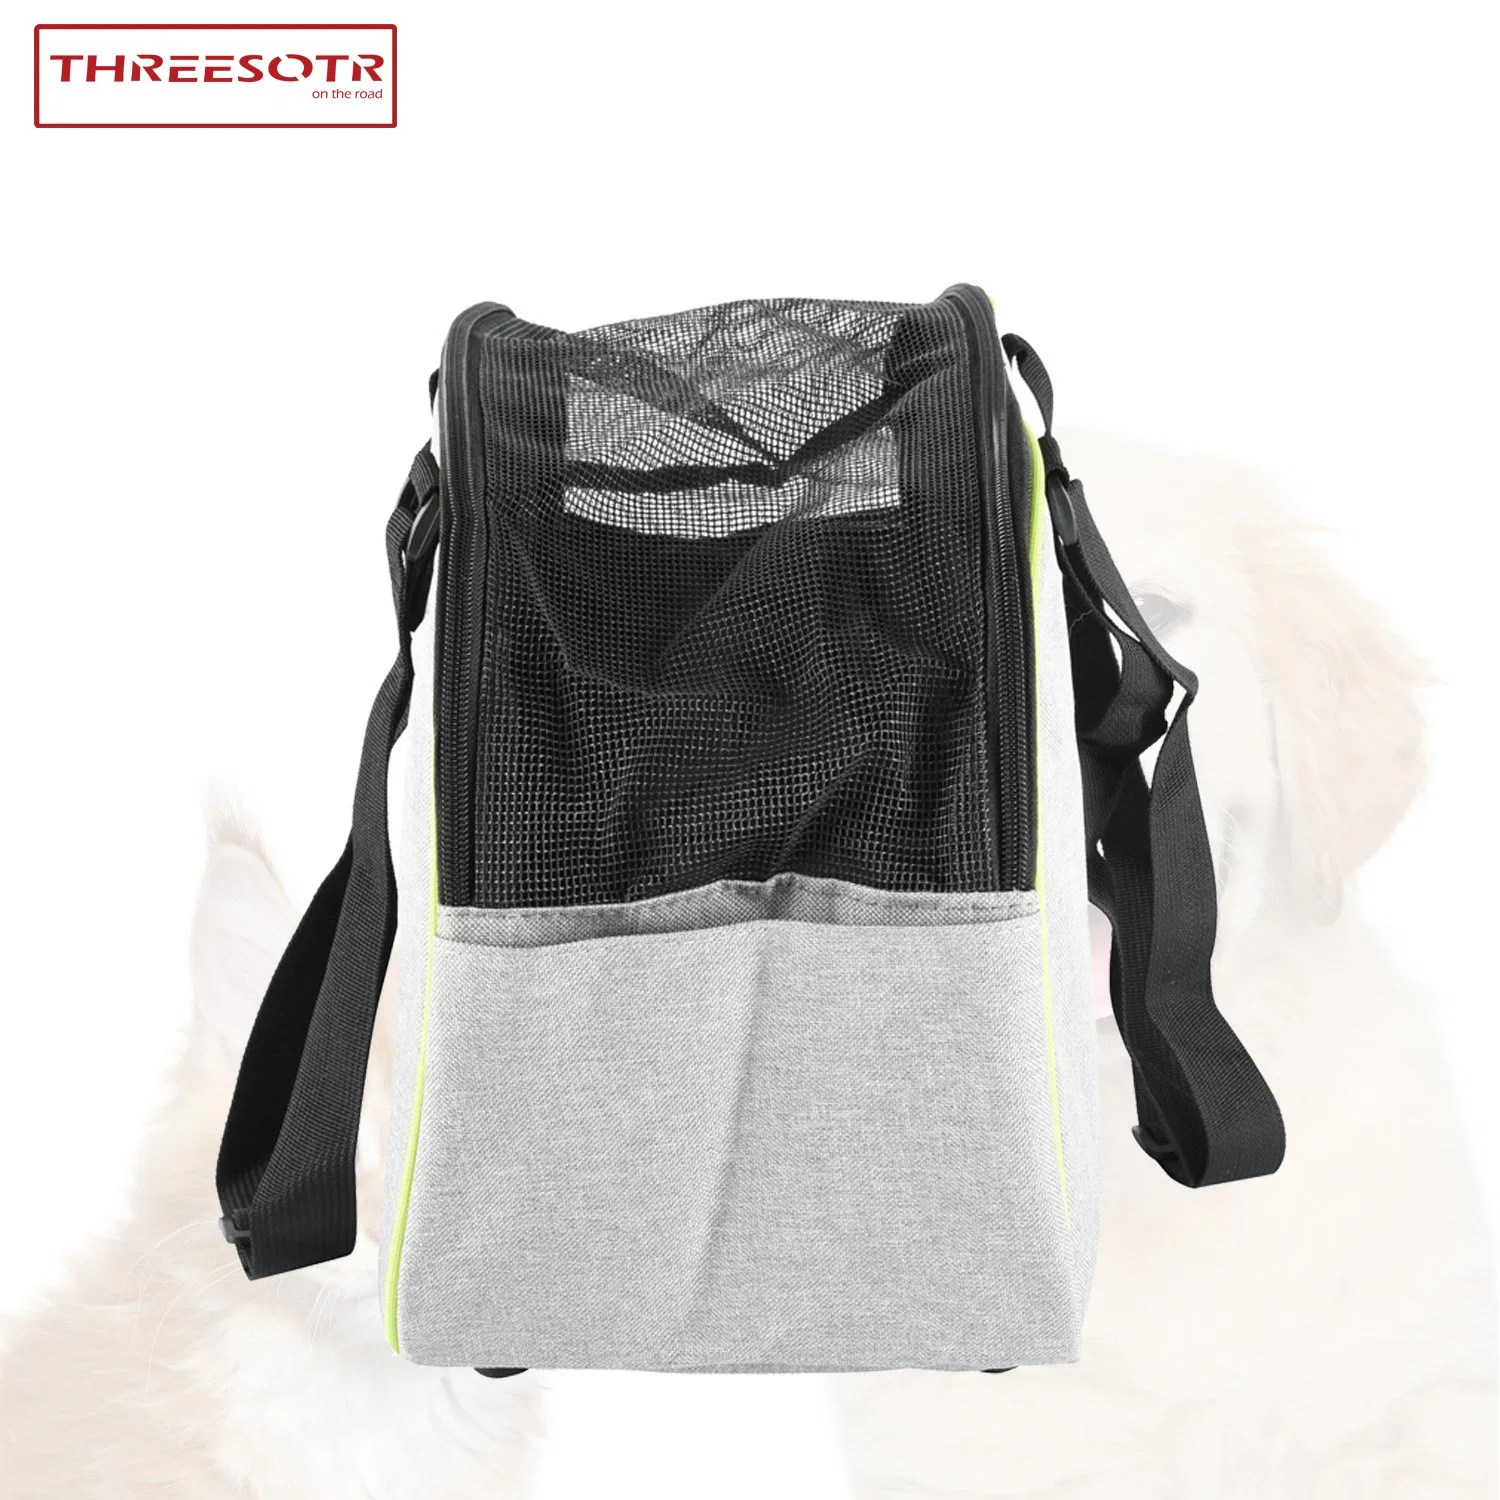 Small Pet Dog Travel Carrier Bag